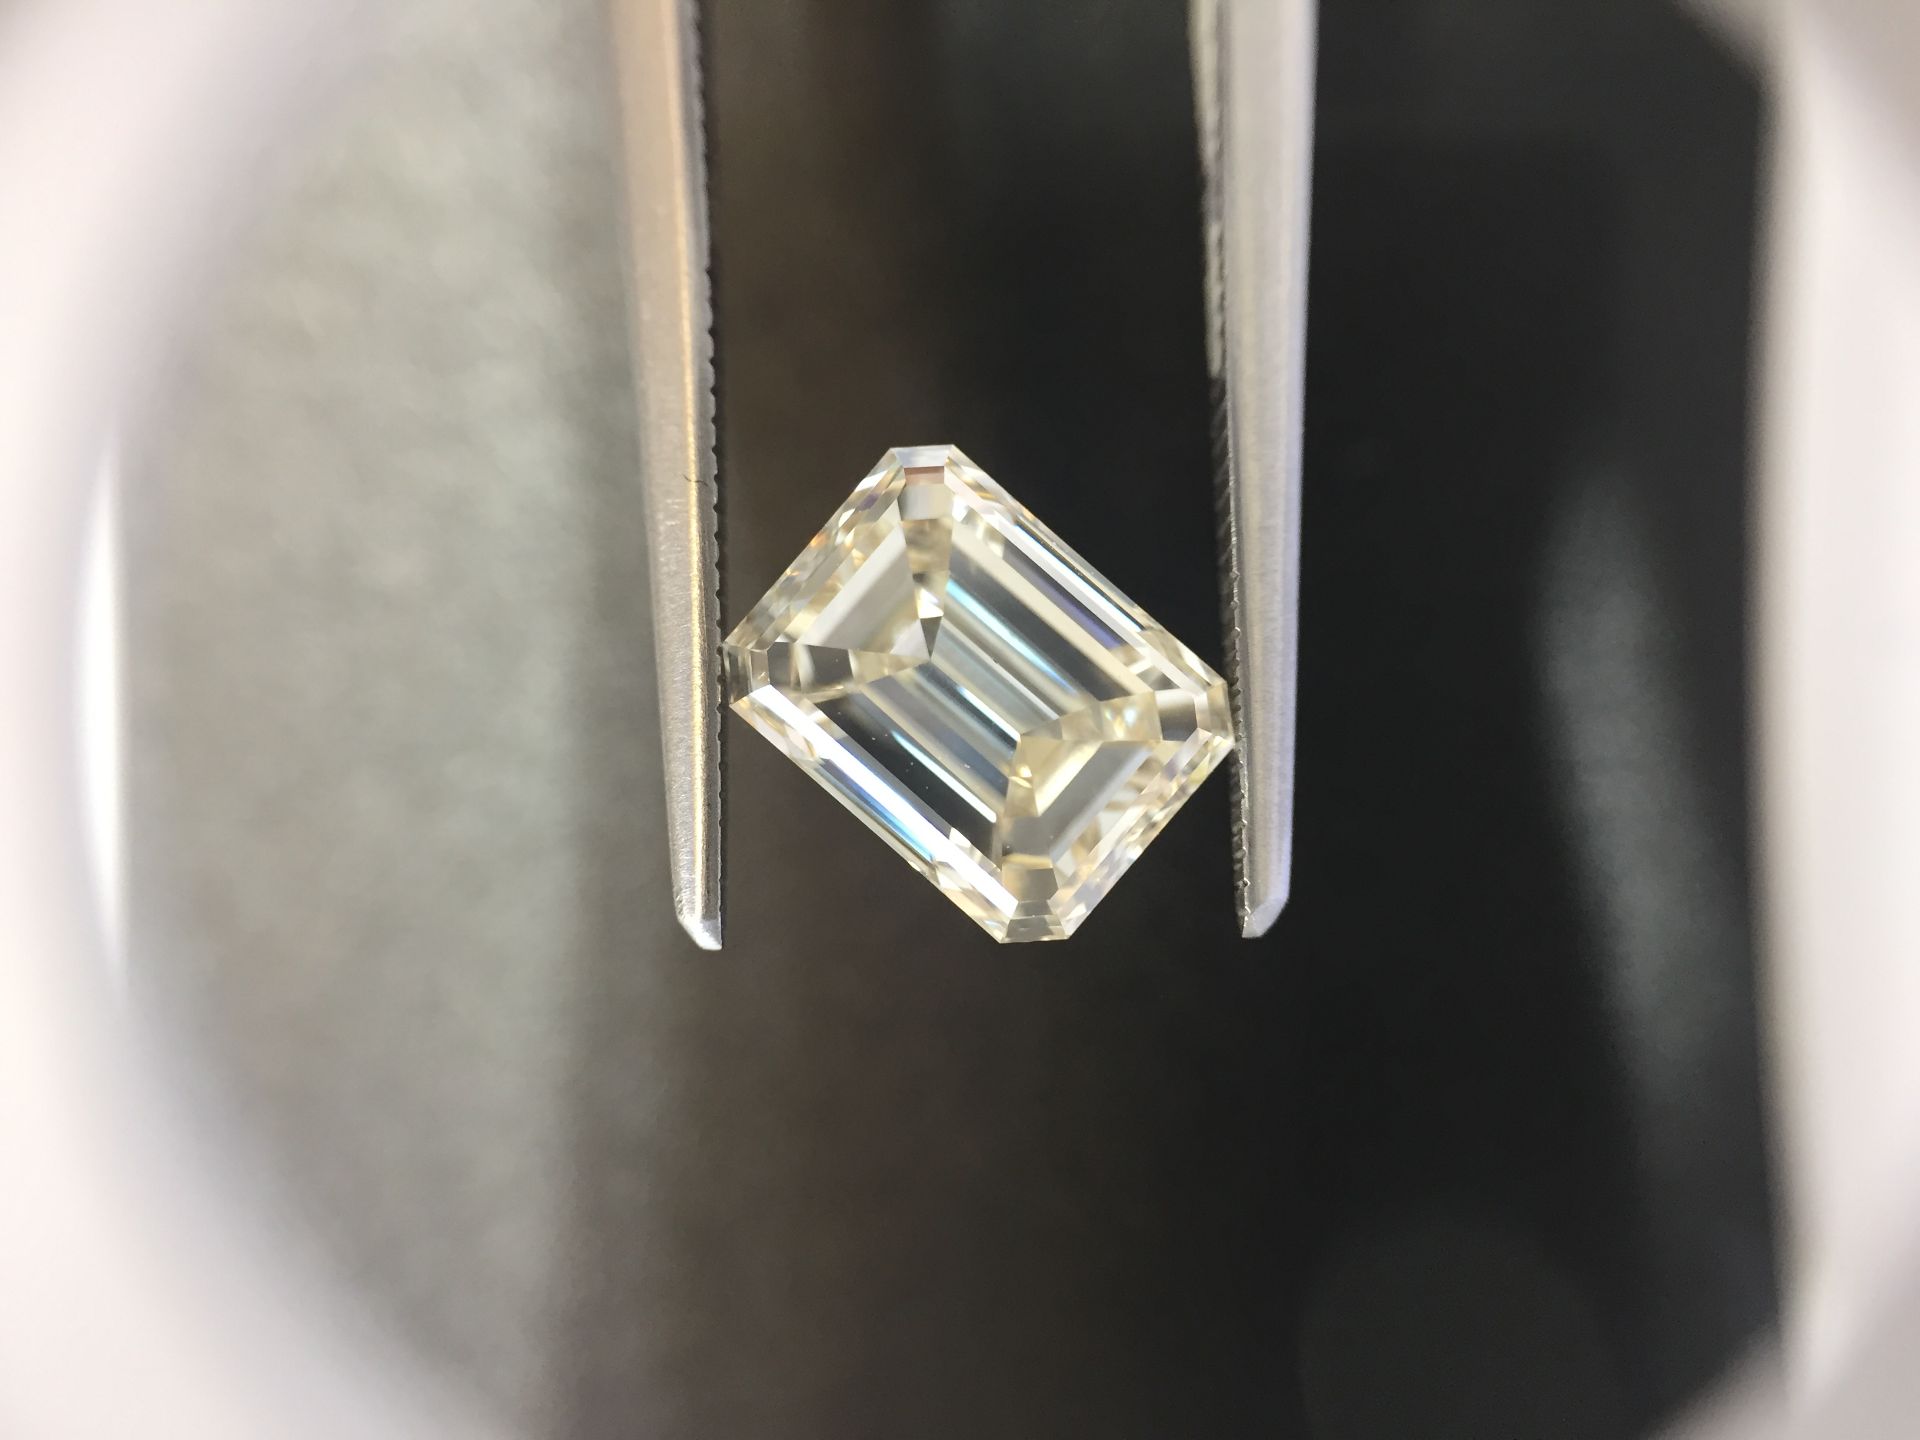 2.00ct emerald cut diamond. N colour, VS1 clarity. No certification. Can be used for ring or pendant